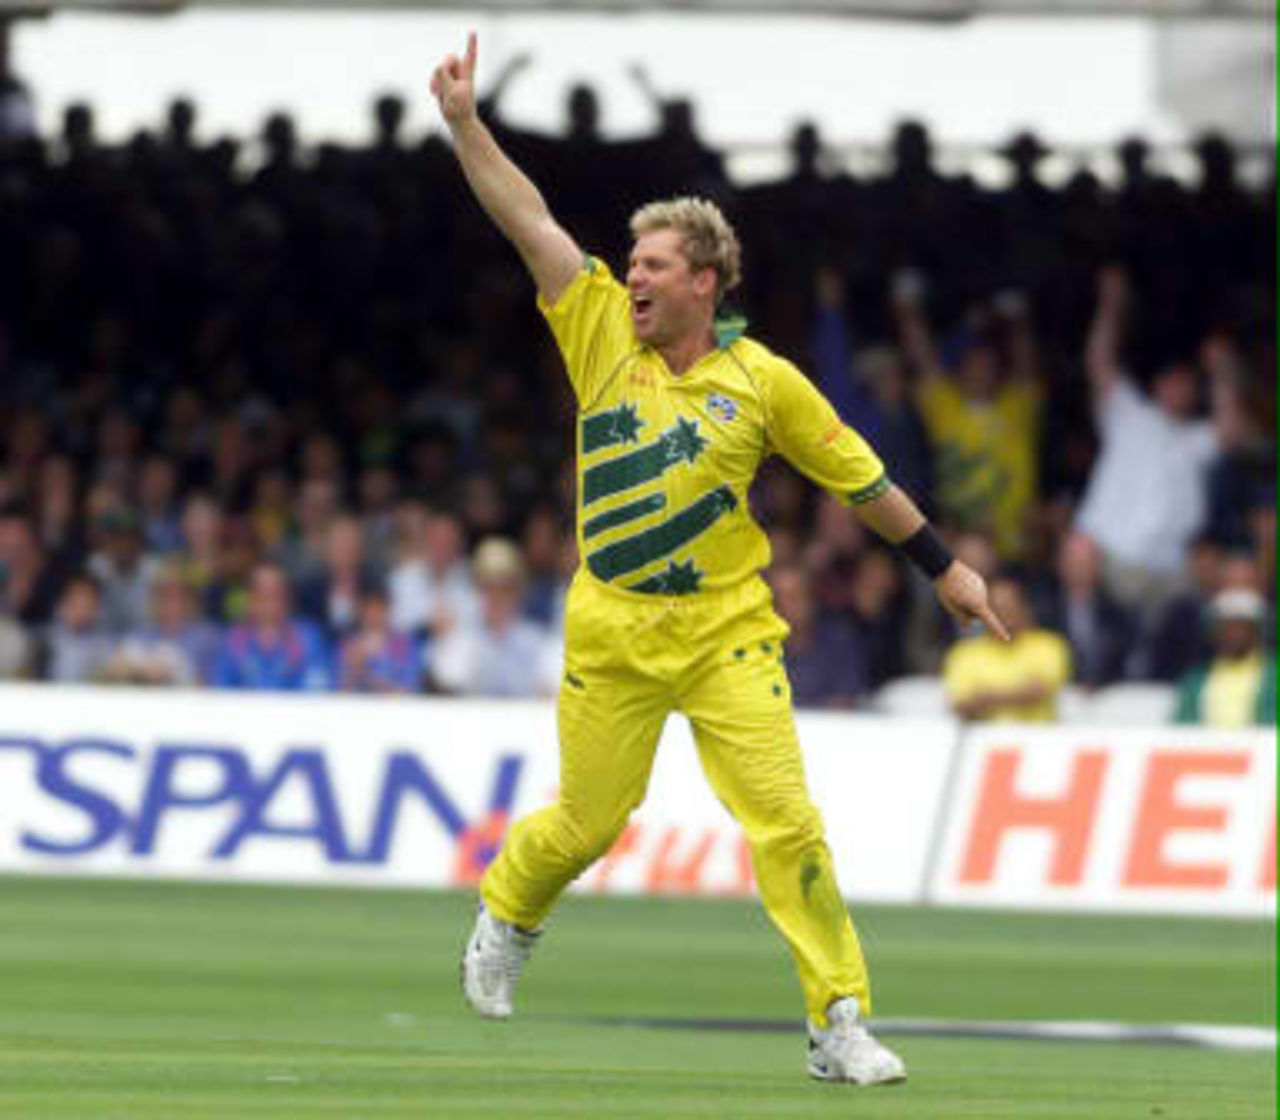 Australia's Shane Warne runs towards his captain Steve Waugh after taking his fourth wicket that of Pakistan's captain Wasim Akram 20 June 1999 during the Cricket World Cup final at Lord's